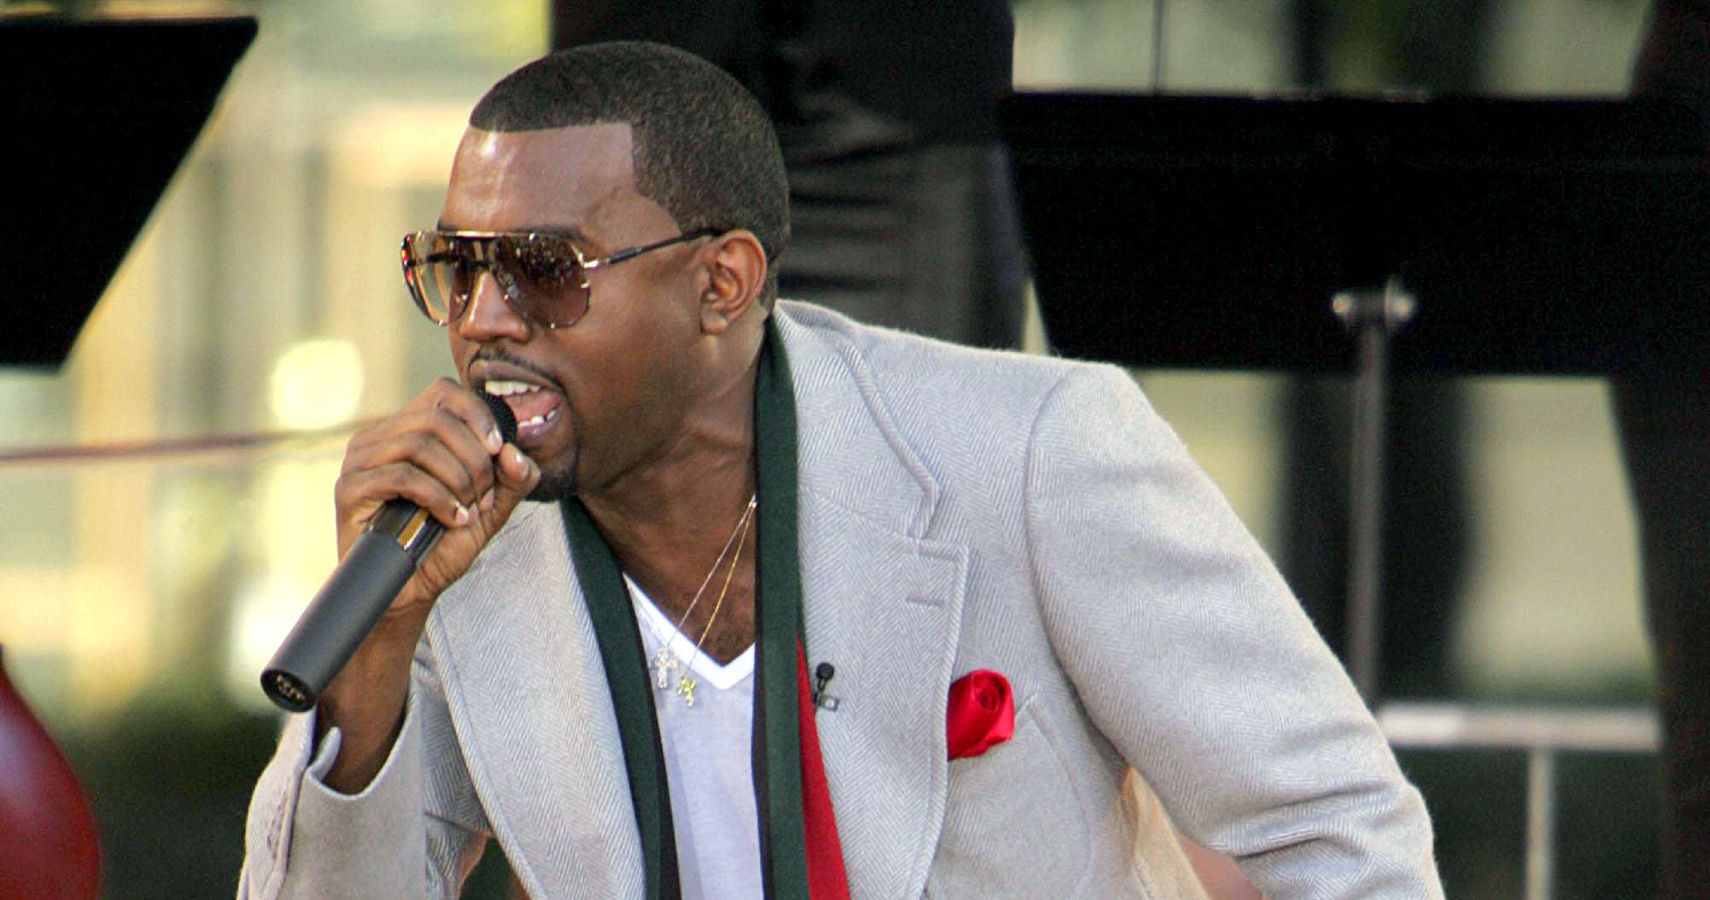 Kanye West Performing At A Concert